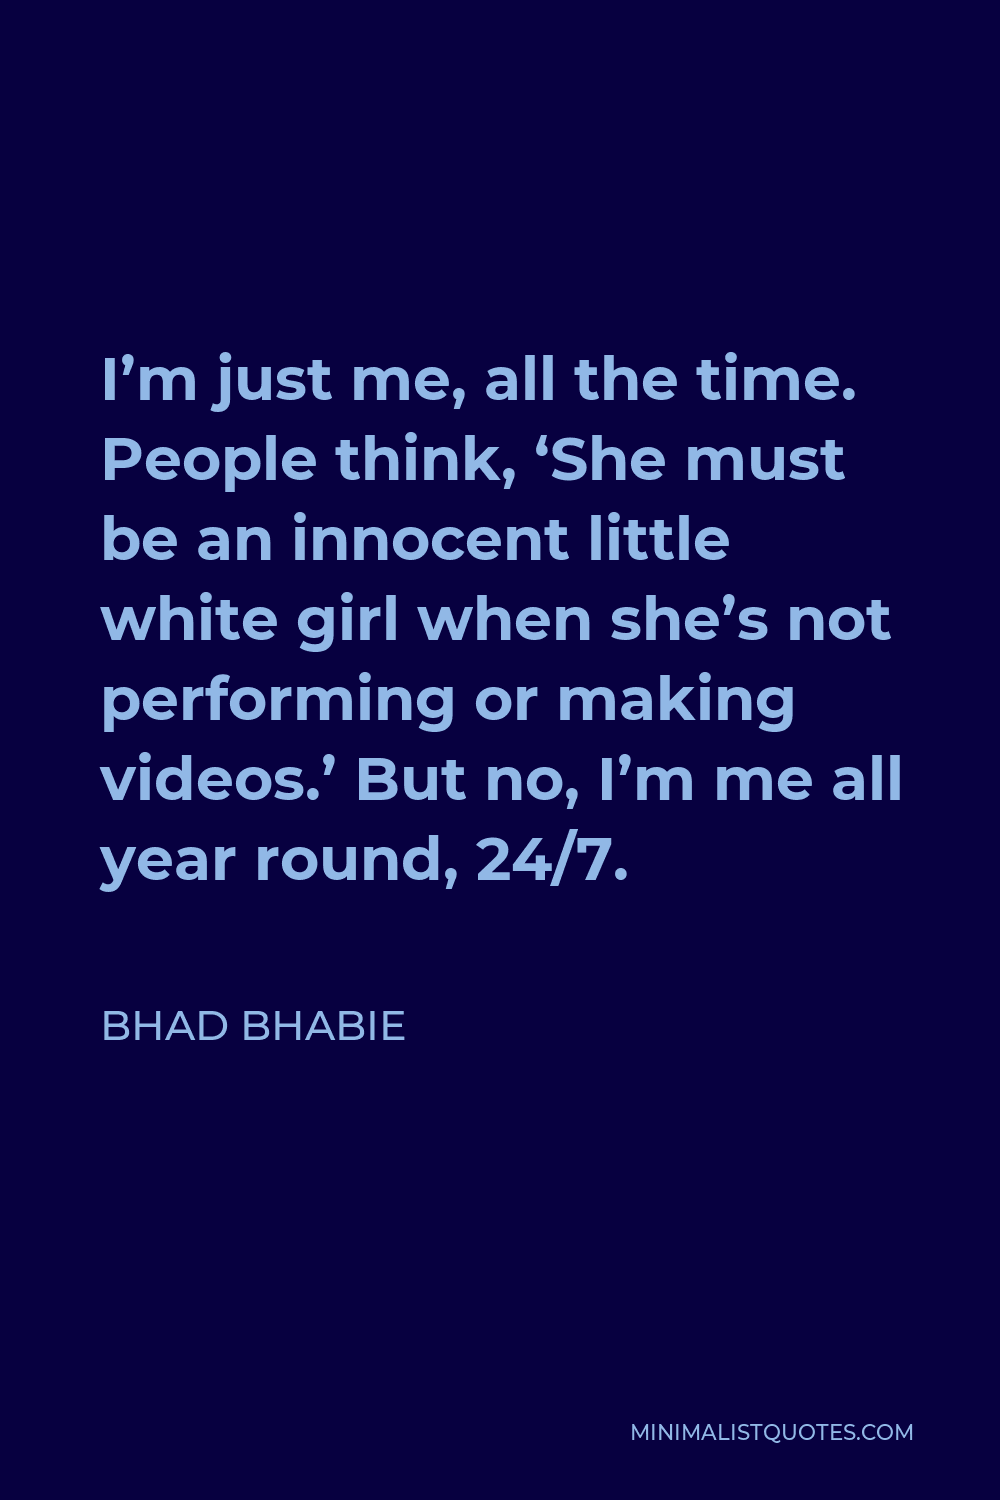 Bhad Bhabie Quote - I’m just me, all the time. People think, ‘She must be an innocent little white girl when she’s not performing or making videos.’ But no, I’m me all year round, 24/7.